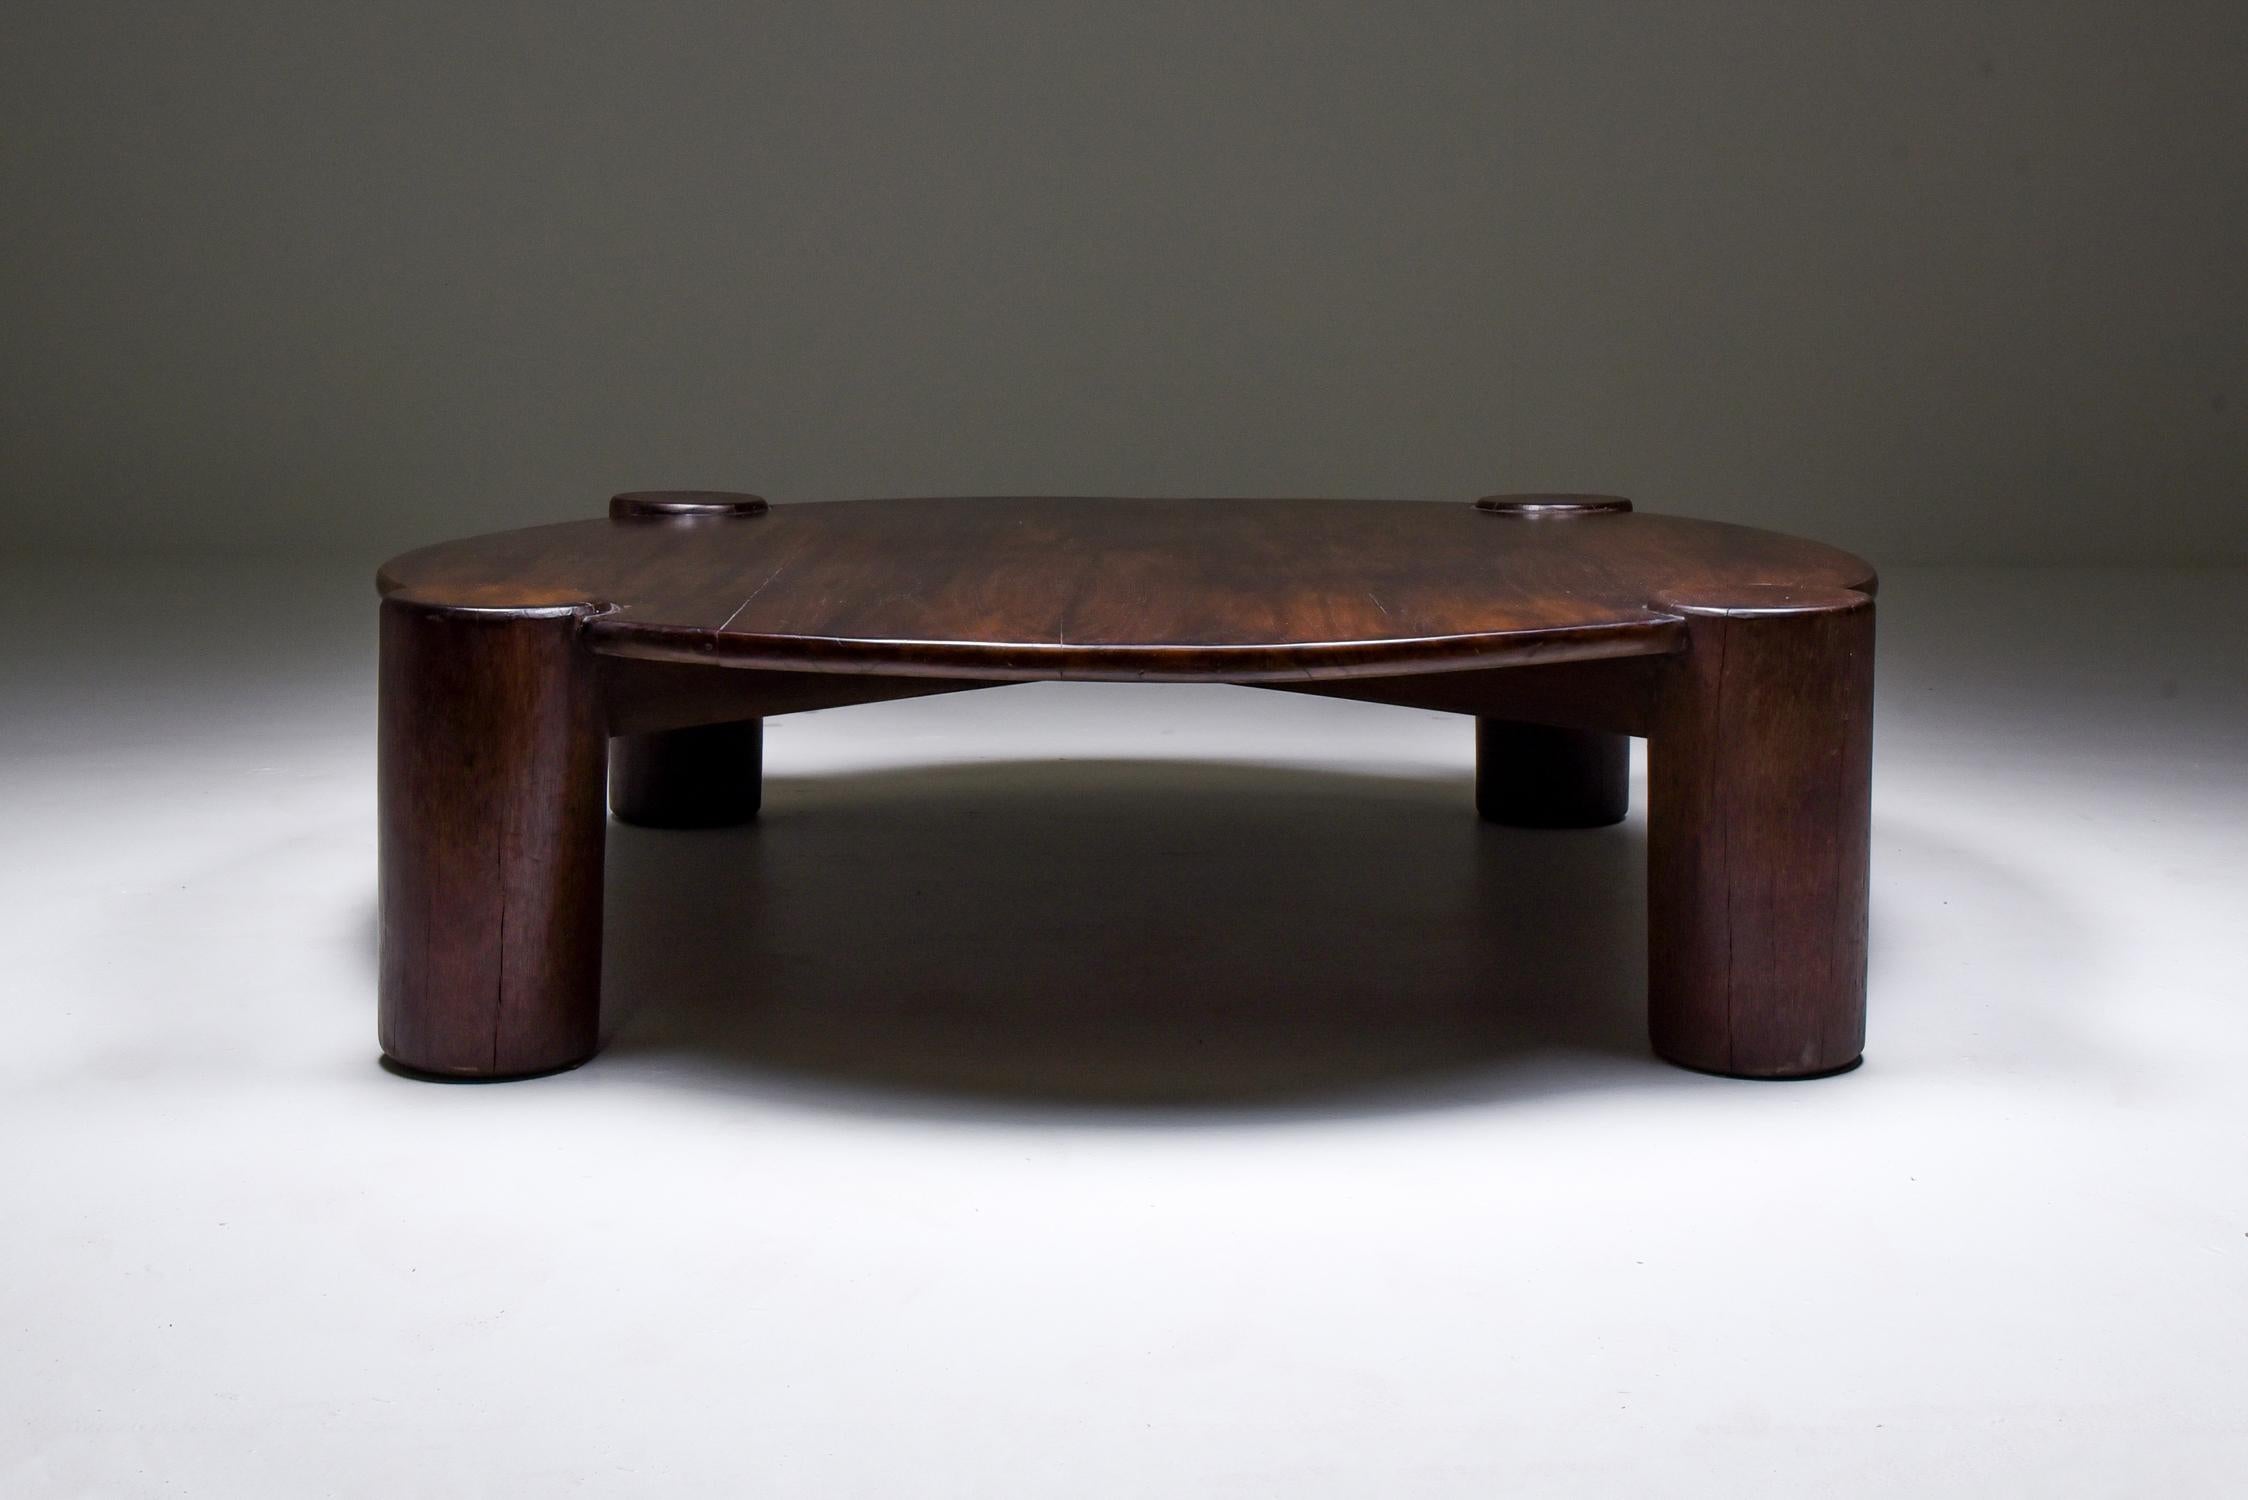 Brazilian modern coffee table, round, walnut and palmwood, Brazil 1960s

Unusual oversize round coffee table 
Top in stained walnut, resting on four pillars made of palmwood. Taking several decades or even centuries for palmwood to grow this